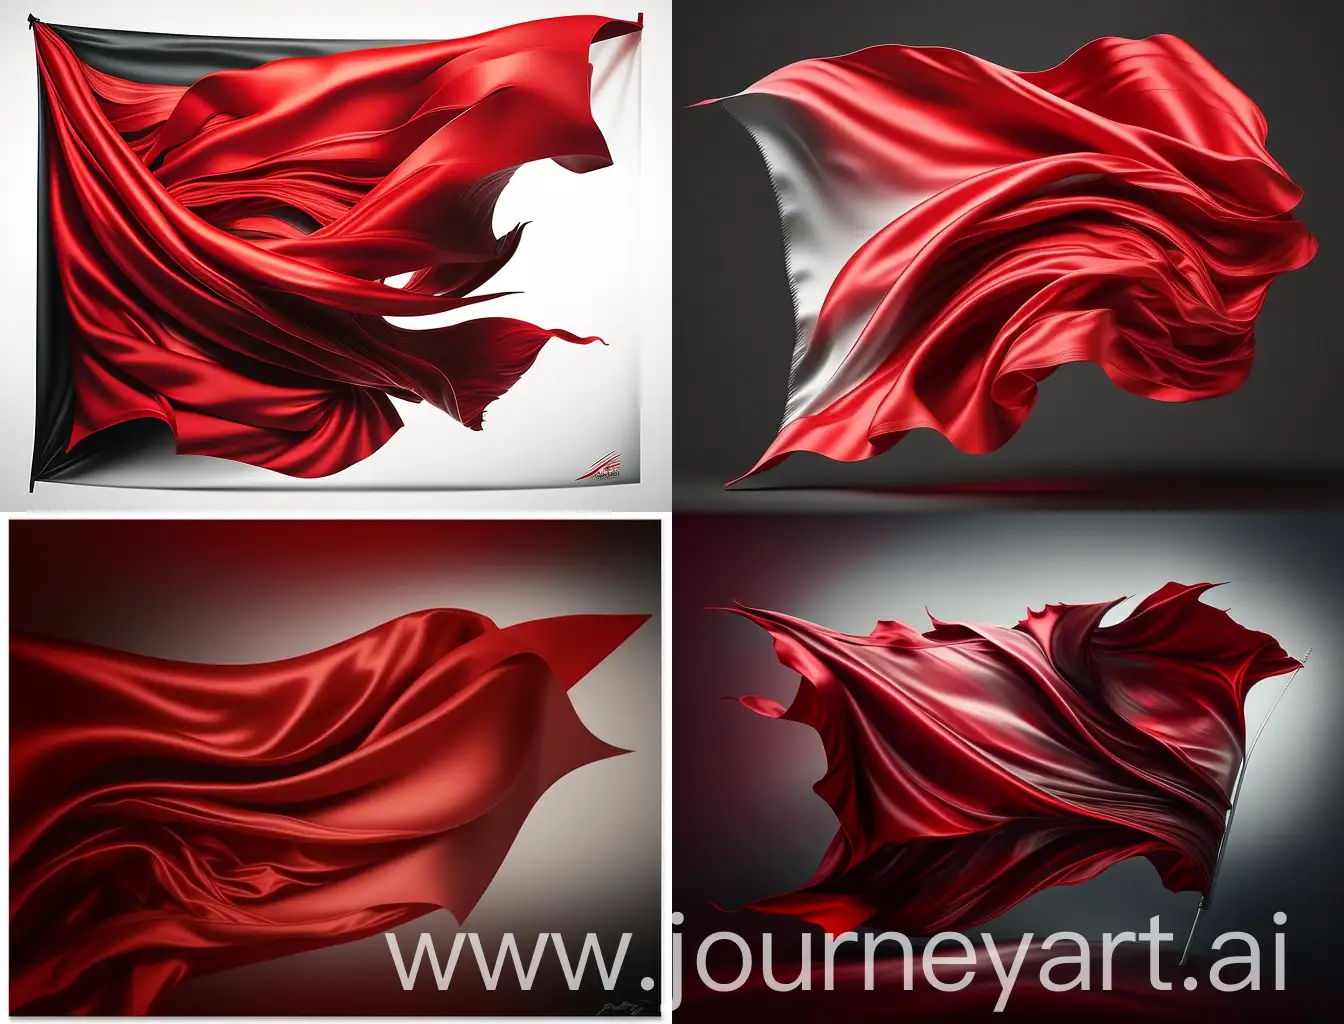 Fluttering-Red-Satin-Fabric-Flag-in-the-Wind